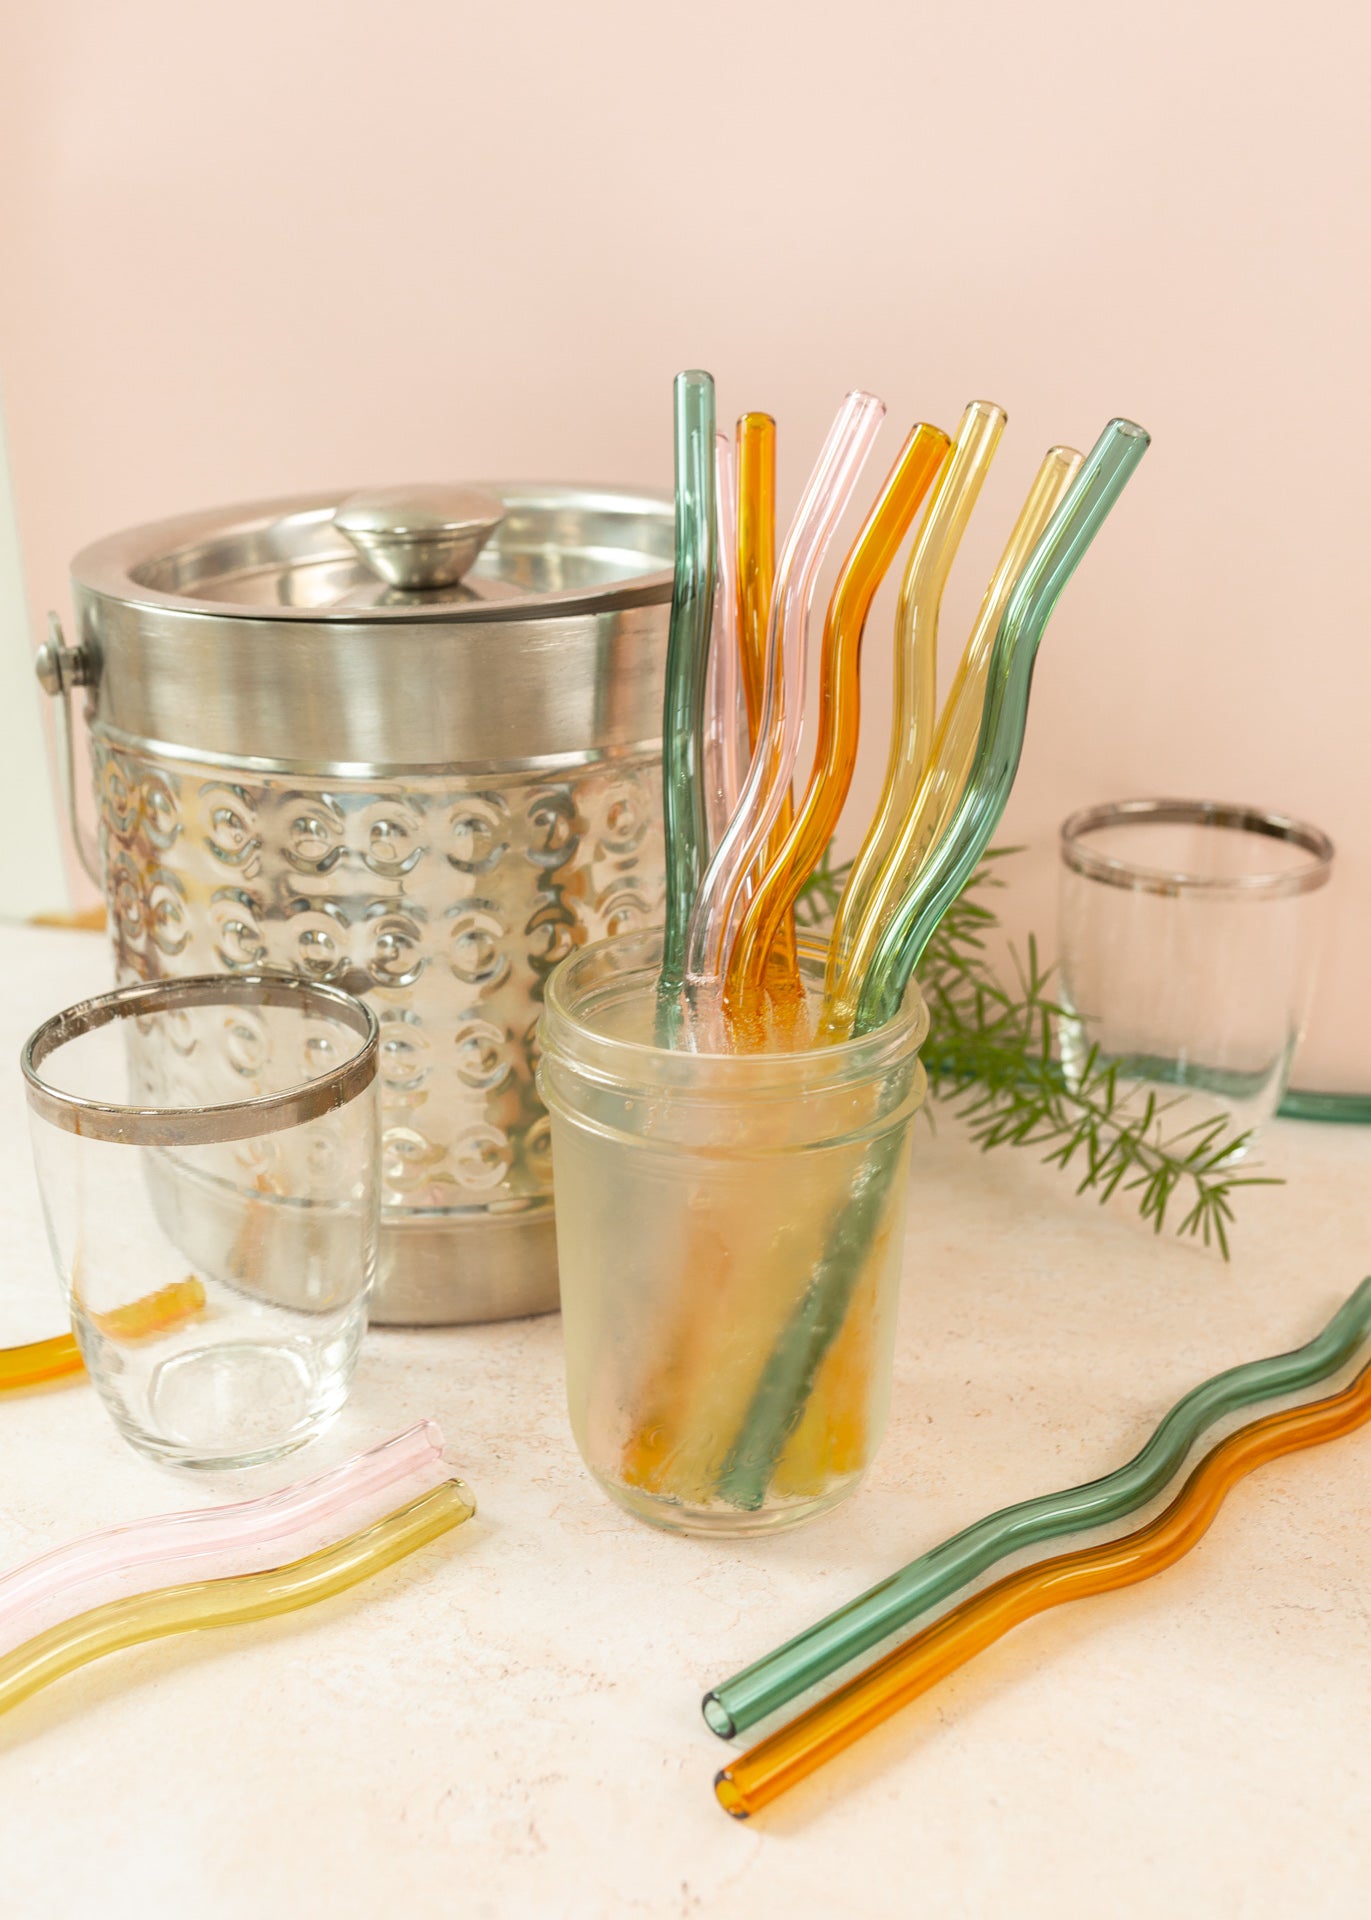 The cutest glass straws 🦋 #springfinds #finds #must